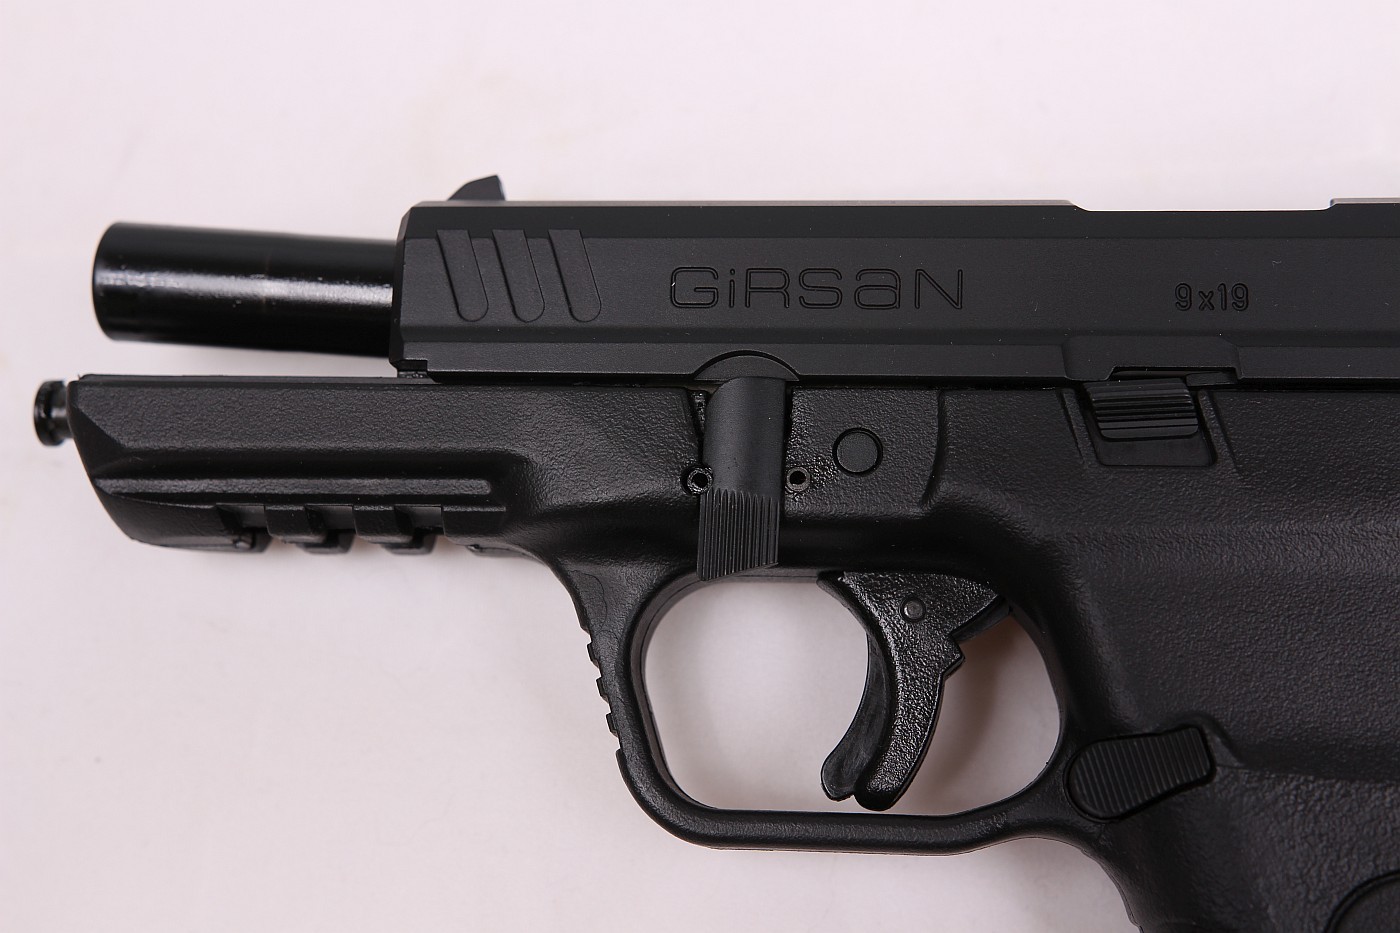 girsan with shadow magazine. big grip installed. different grips. case. fro...